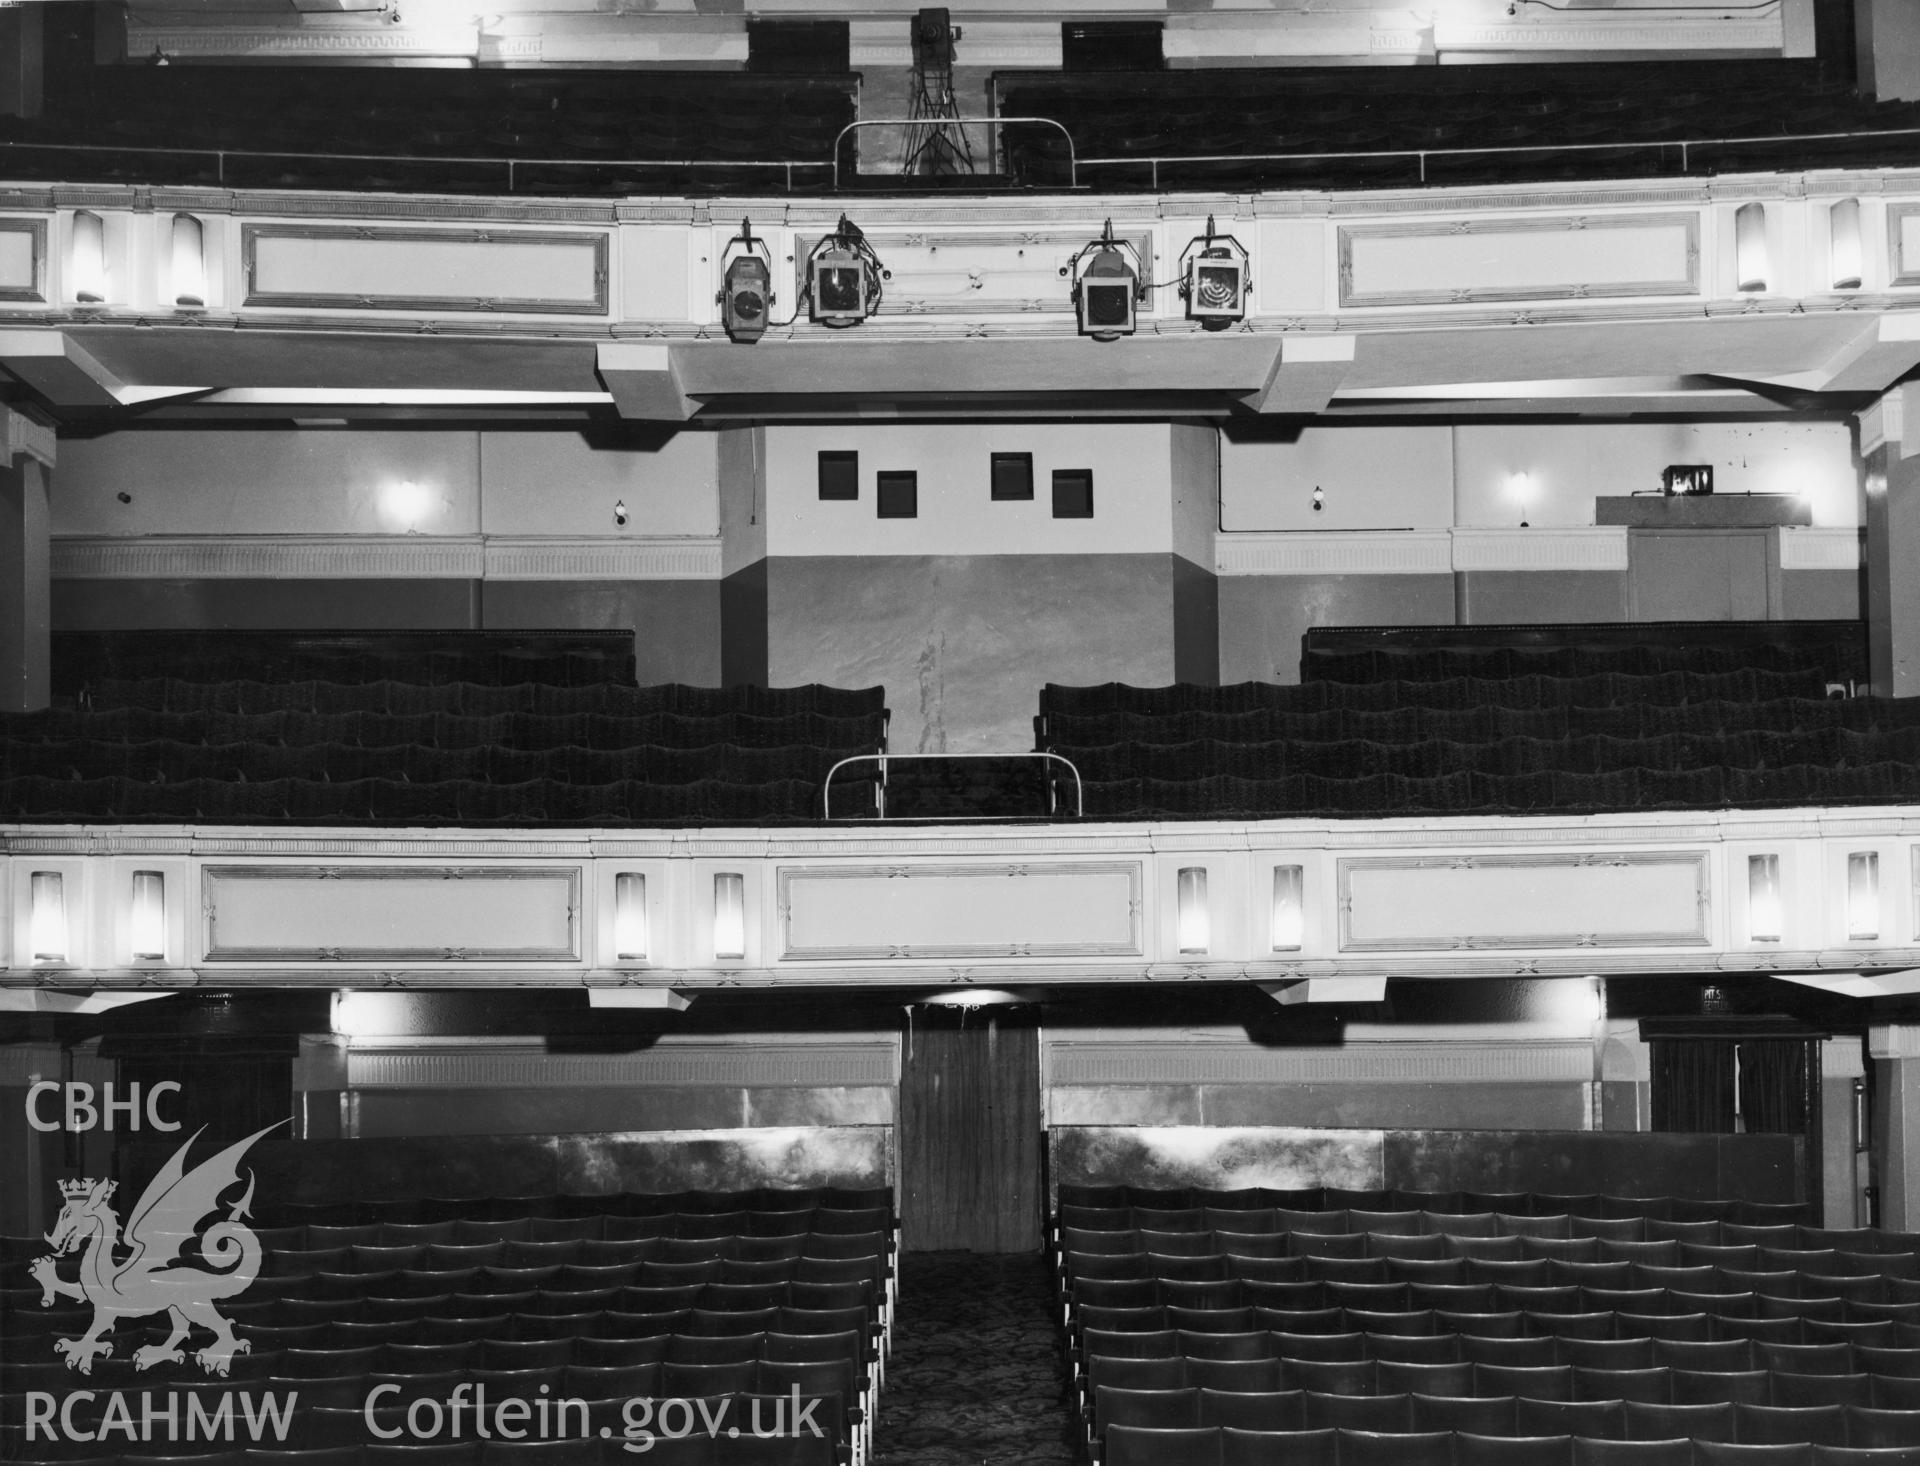 One black and white print of the Prince of Wales Theatre, Cardiff, showing the interior auditorium. Undated but received by NBR on 22/03/1960.